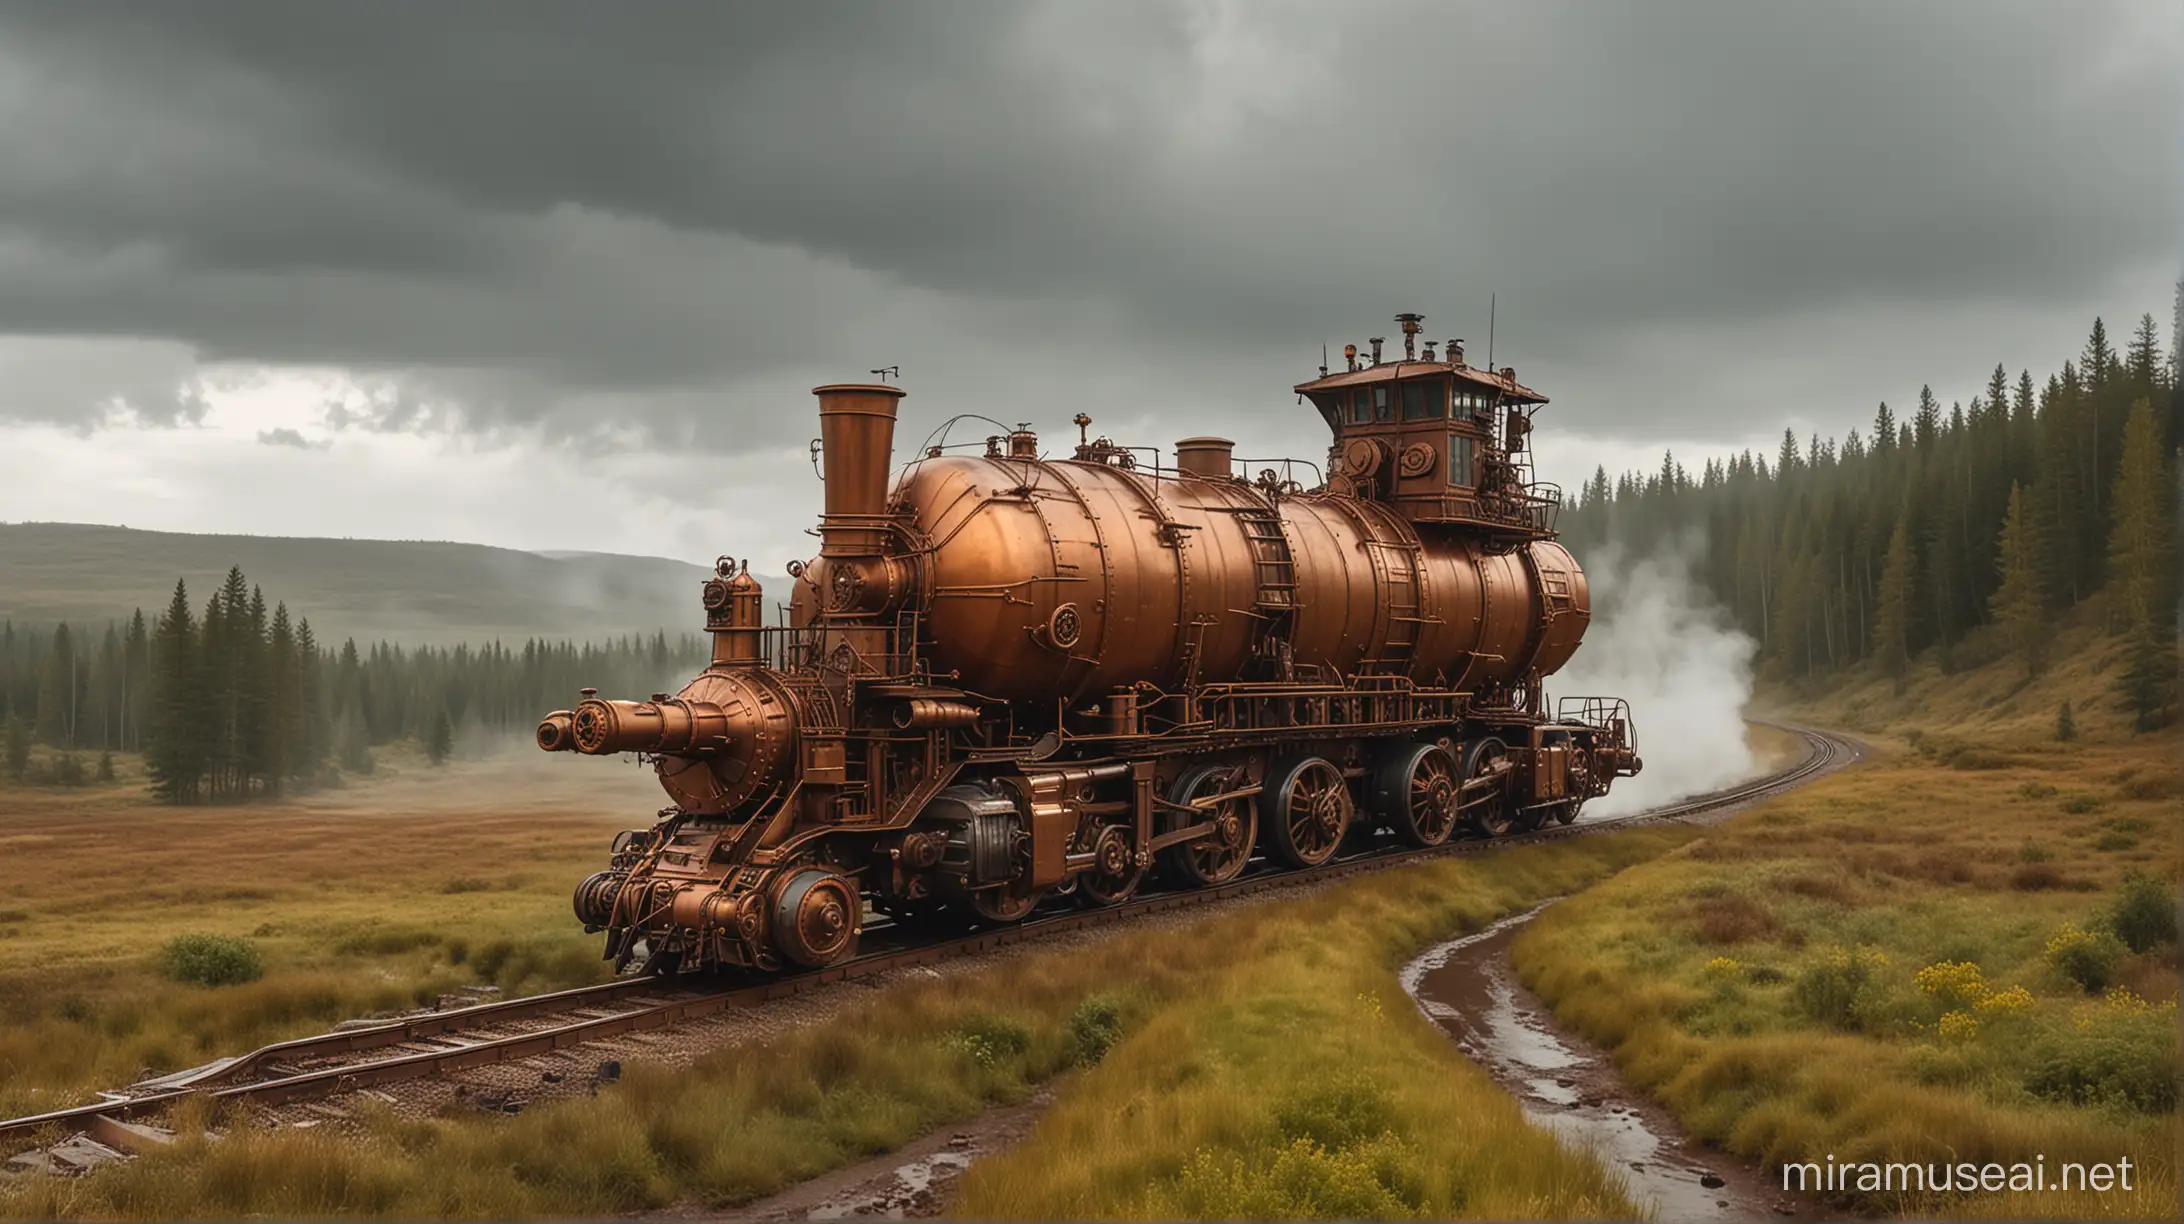 a strange giant steampunk vehicle crosses a ditch across its route in the wilderness. the vehicle is made of copper and gold. large engines, caterpillar tracks, steam, smoke. Rainy and cloudy